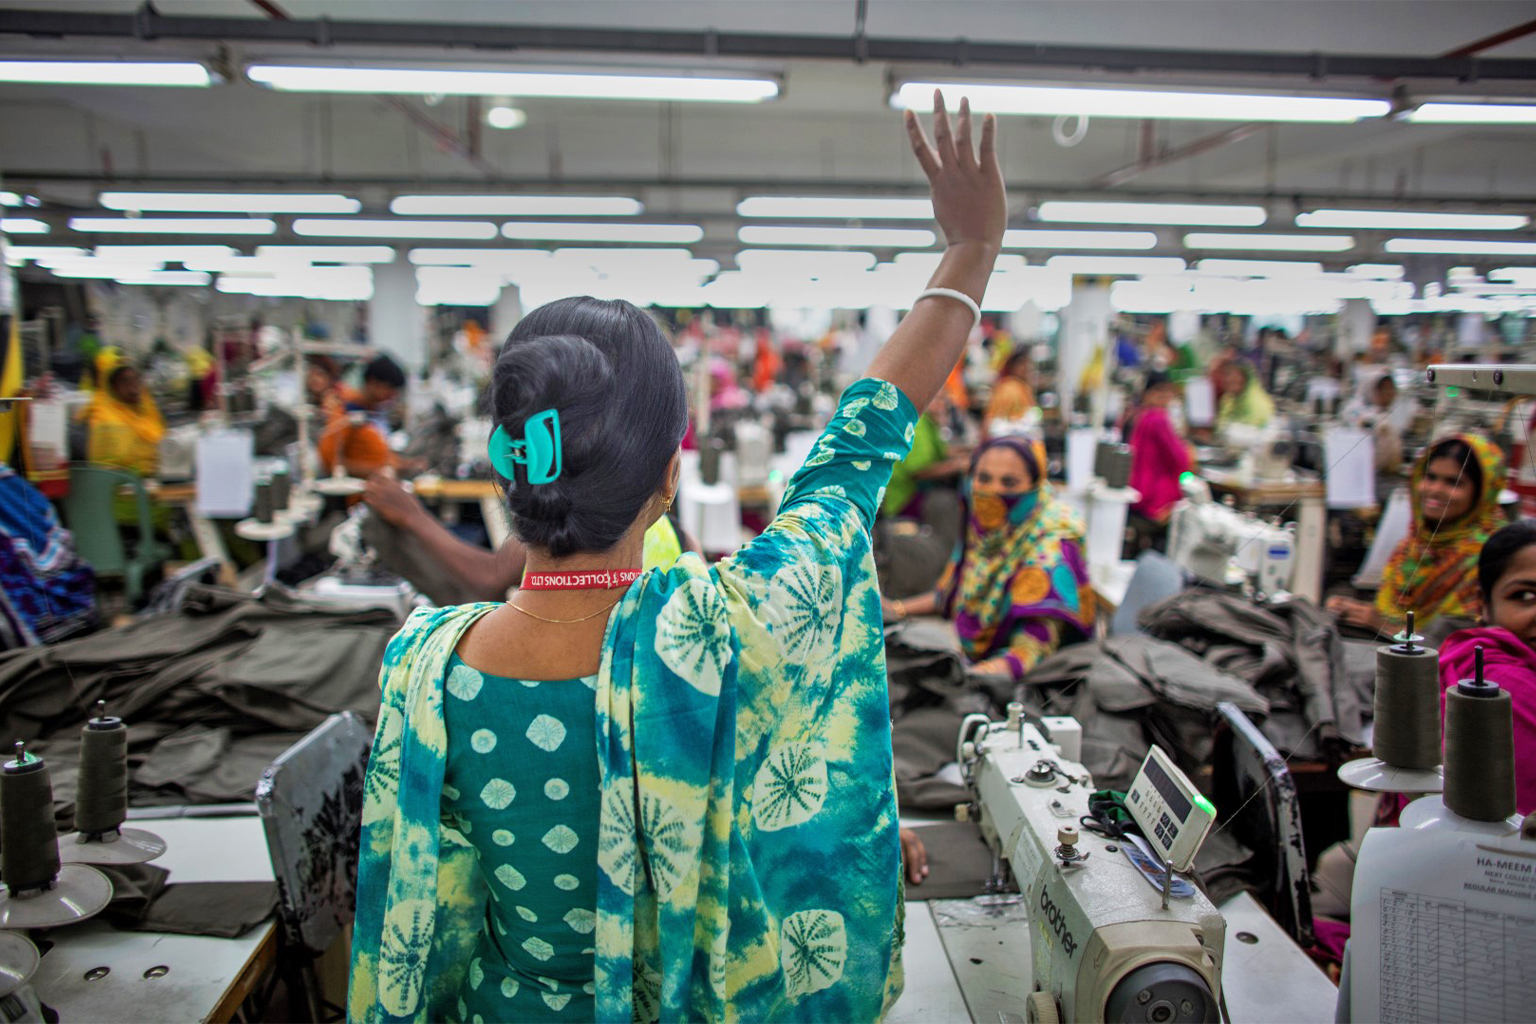 The RMG industry in Bangladesh employs of 4.4 million people — mostly rural women.